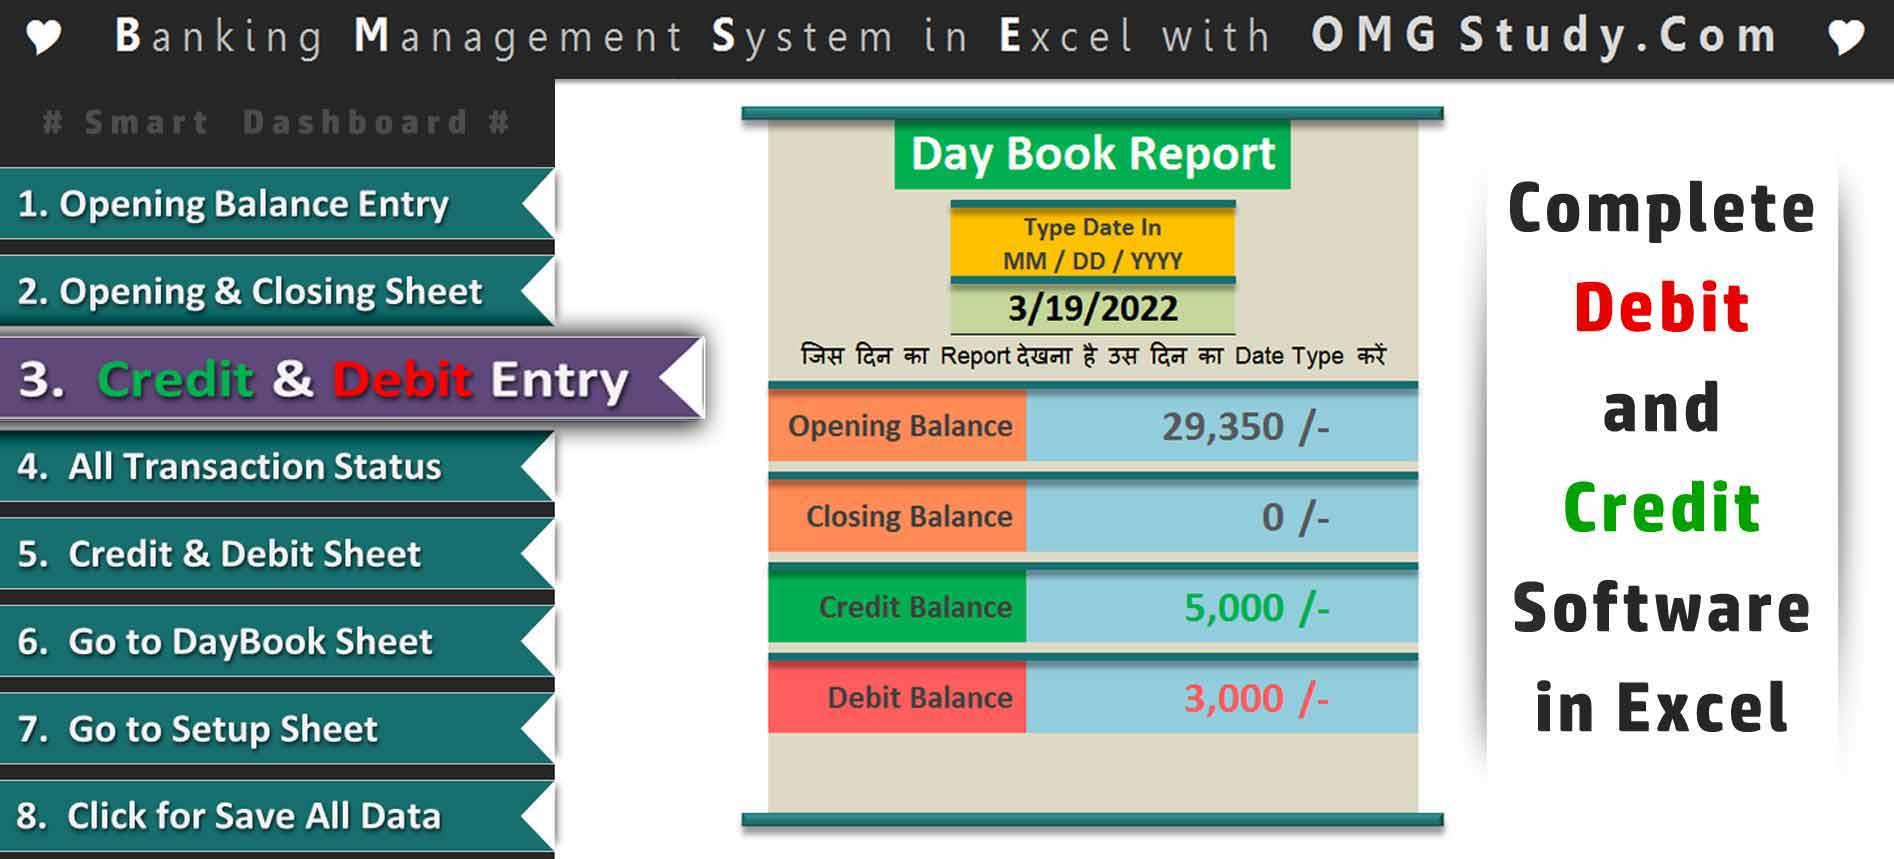 Credit and Debit System in Excel